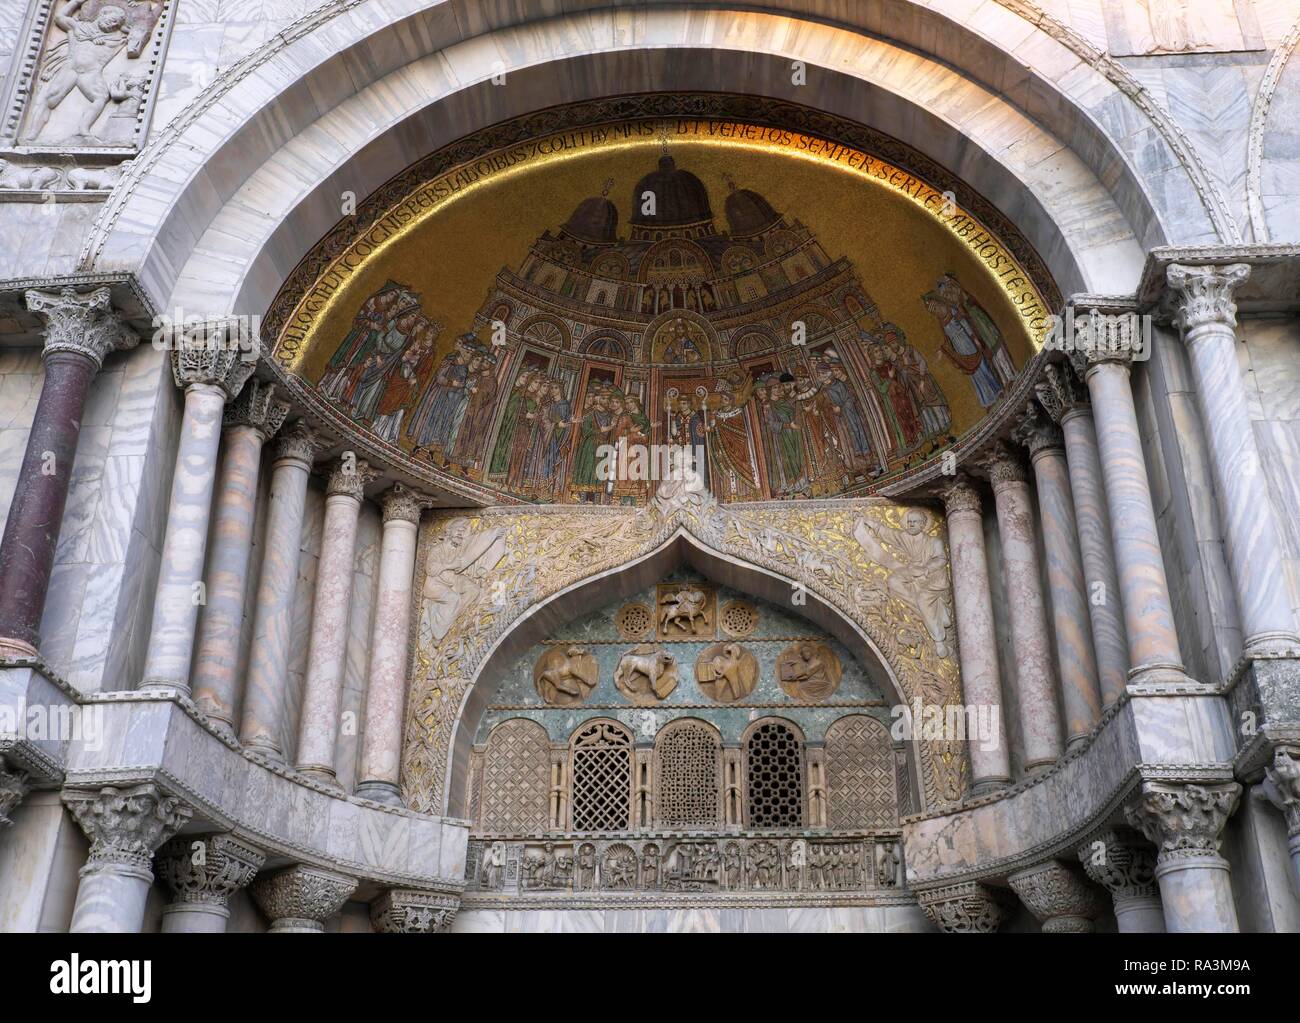 Entrance portal with artistic mosaic, St. Mark's Cathedral, Basilica di San Marco, St. Mark's Square, Piazza San Marco, Venice Stock Photo